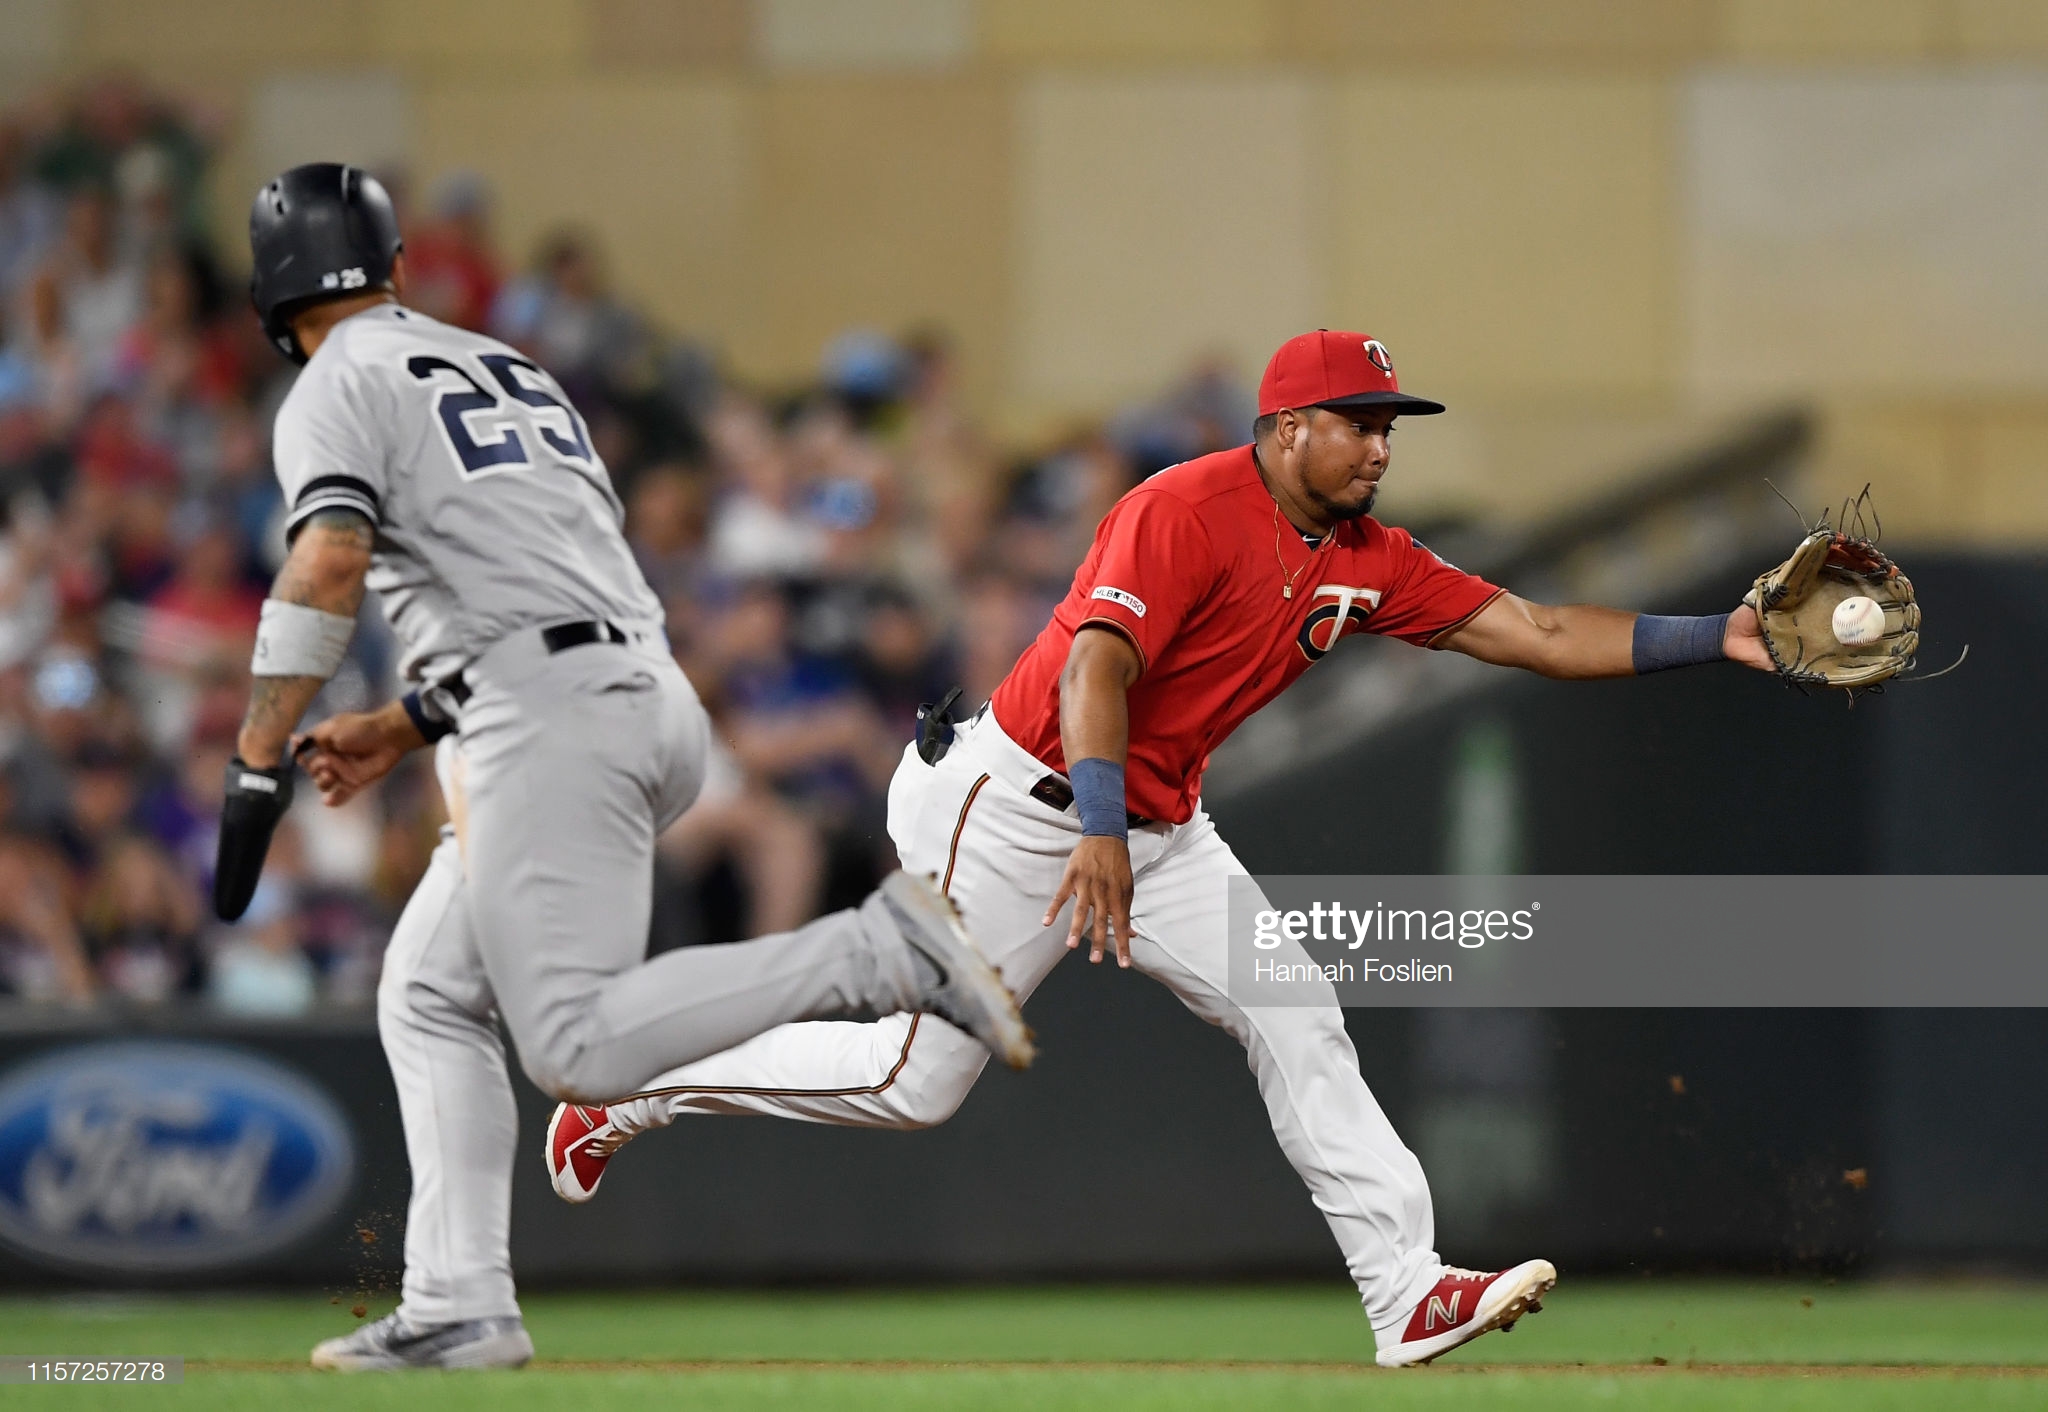 MINNEAPOLIS, MN - JULY 22: Gleyber Torres #25 of the New York Yankees runs to third base as Luis Arraez #2 of the Minnesota Twins fields the ball hit by Gio Urshela #29 of the New York Yankees during the sixth inning of the game on July 22, 2019 at Target Field in Minneapolis, Minnesota. (Photo by Hannah Foslien/Getty Images)